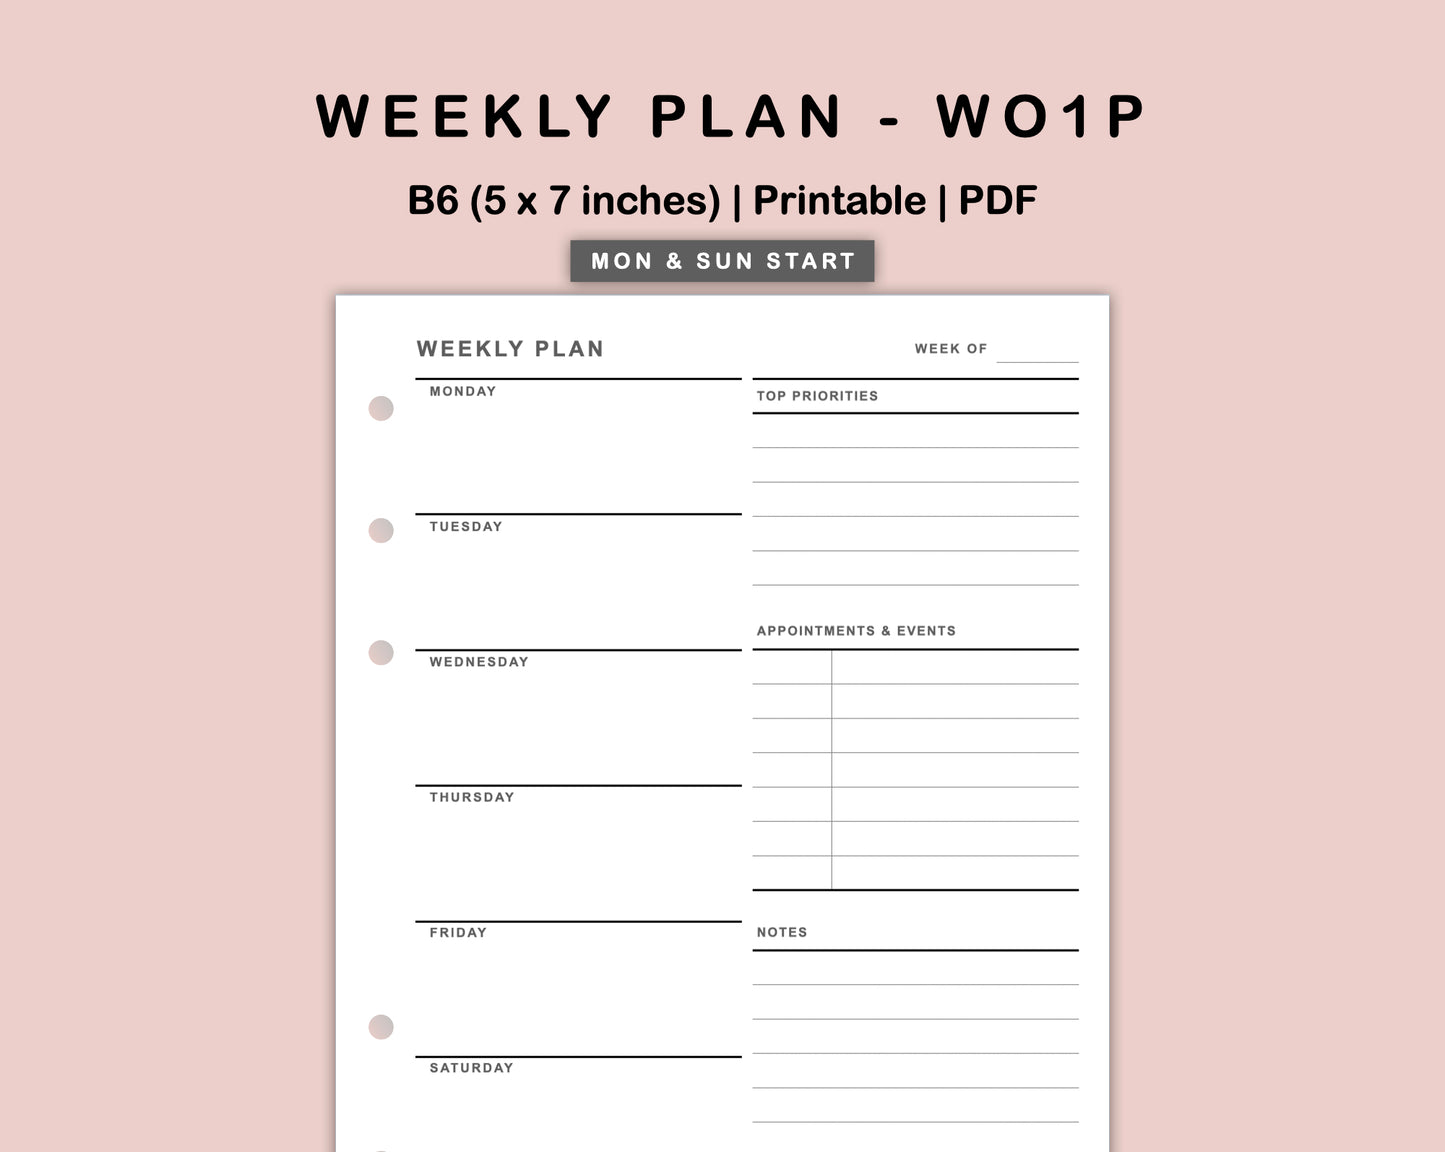 B6 Inserts - Weekly Plan - WO1P - with Top Priority